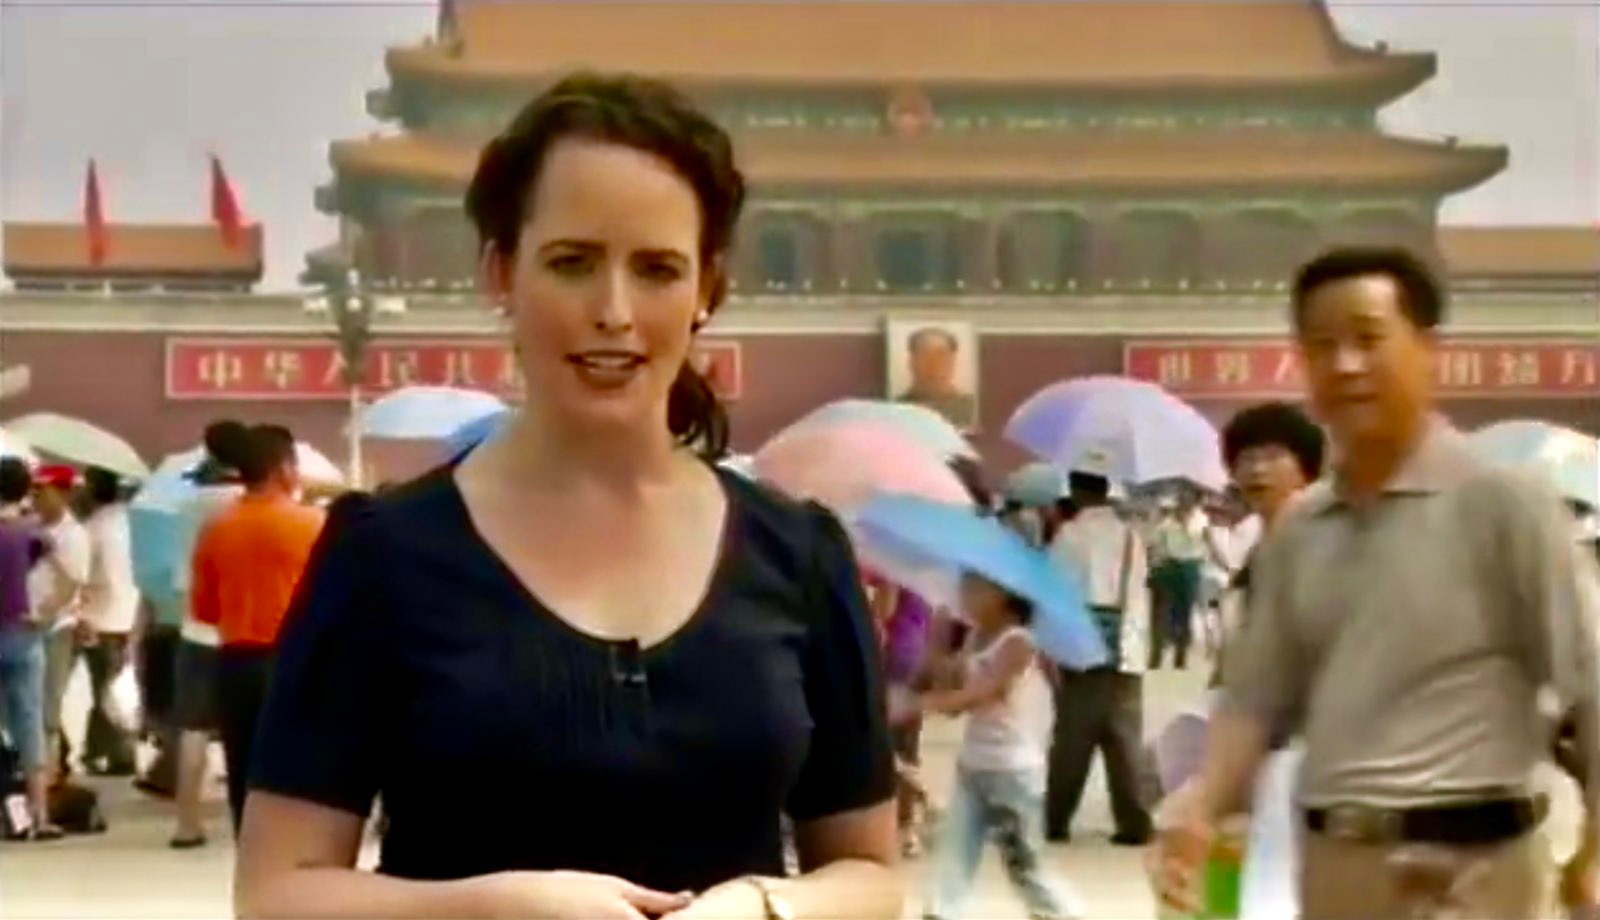 Shannon Van Sant reporting from China for PBS in 2009